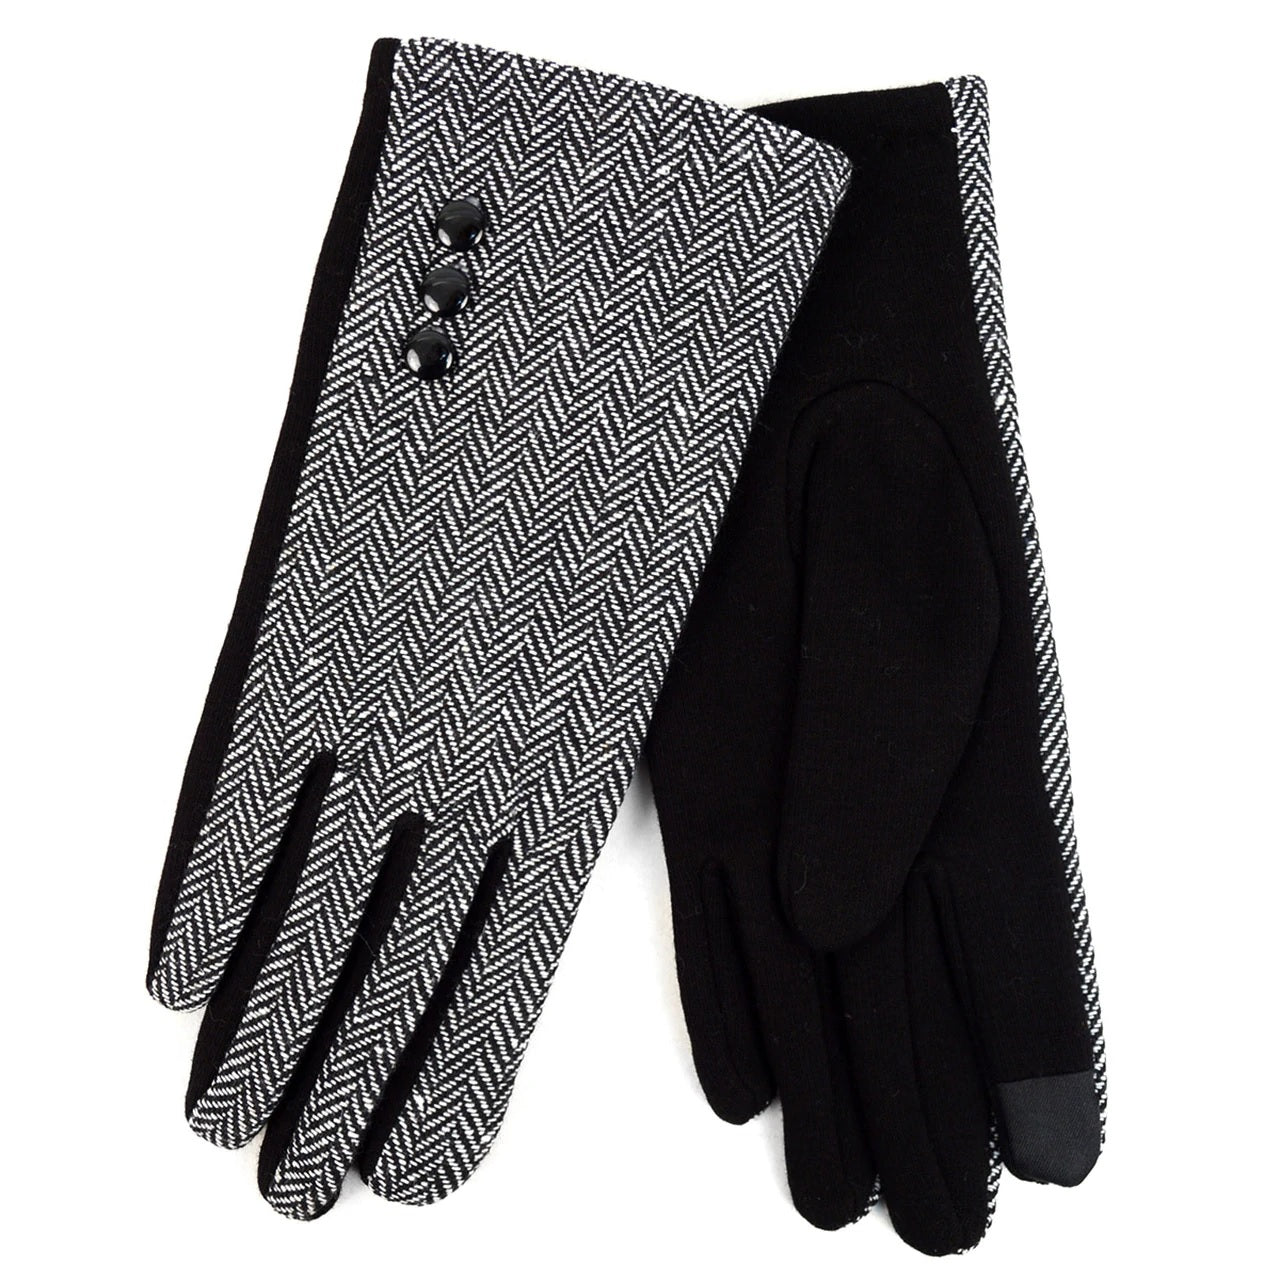 Herringbone Touch Screen Women's Gloves | Glamorous Retro Styling with 3-Button Accent